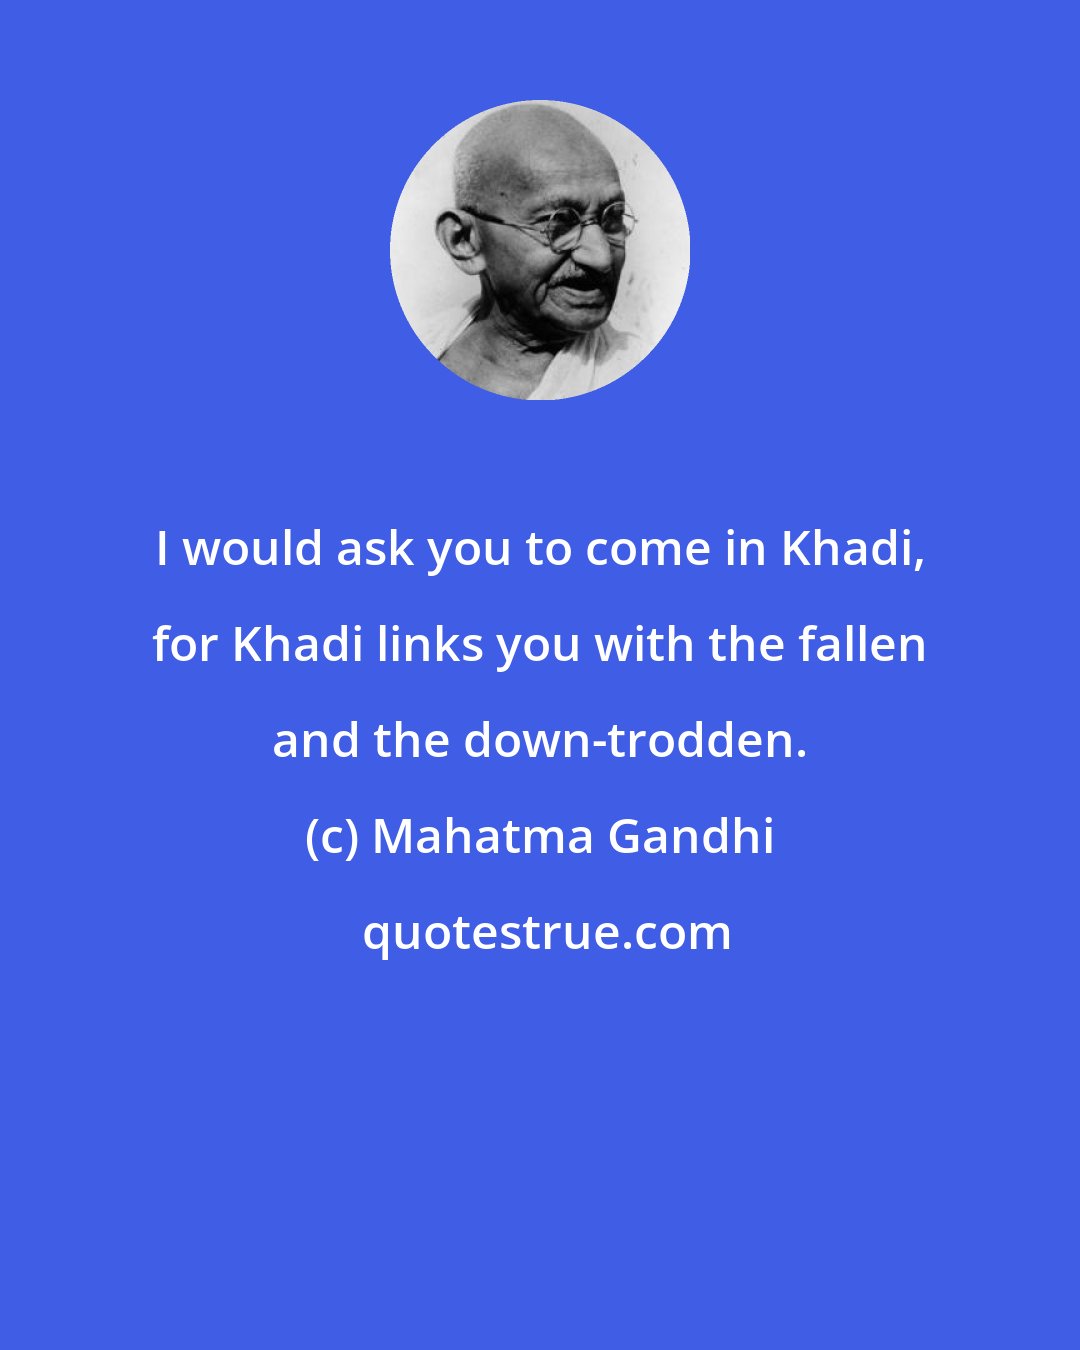 Mahatma Gandhi: I would ask you to come in Khadi, for Khadi links you with the fallen and the down-trodden.